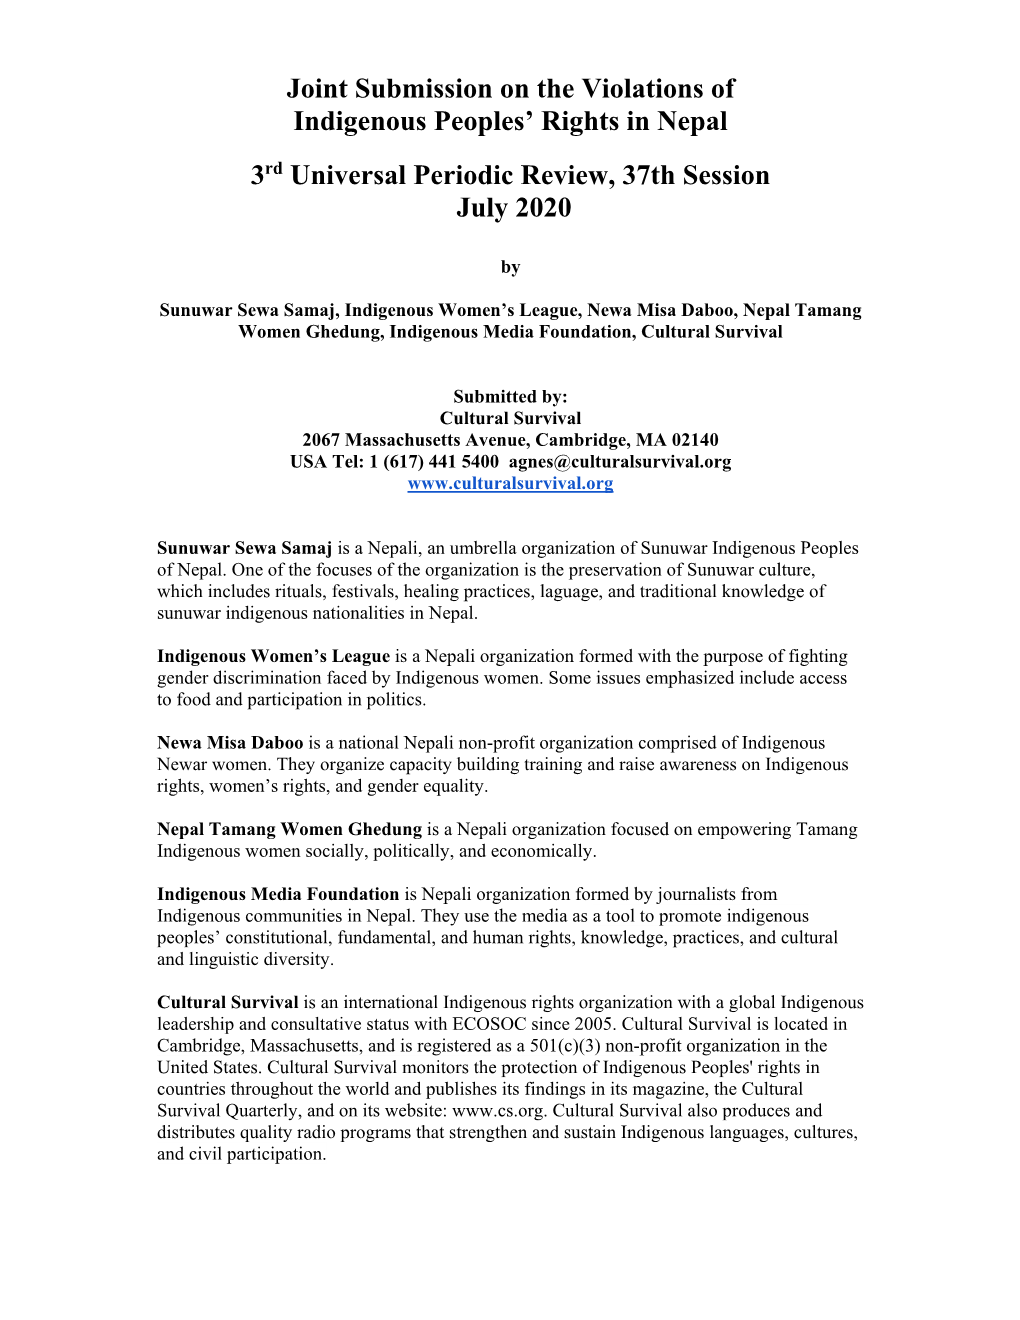 Joint Submission on the Violations of Indigenous Peoples' Rights in Nepal 3Rd Universal Periodic Review, 37Th Session July 2